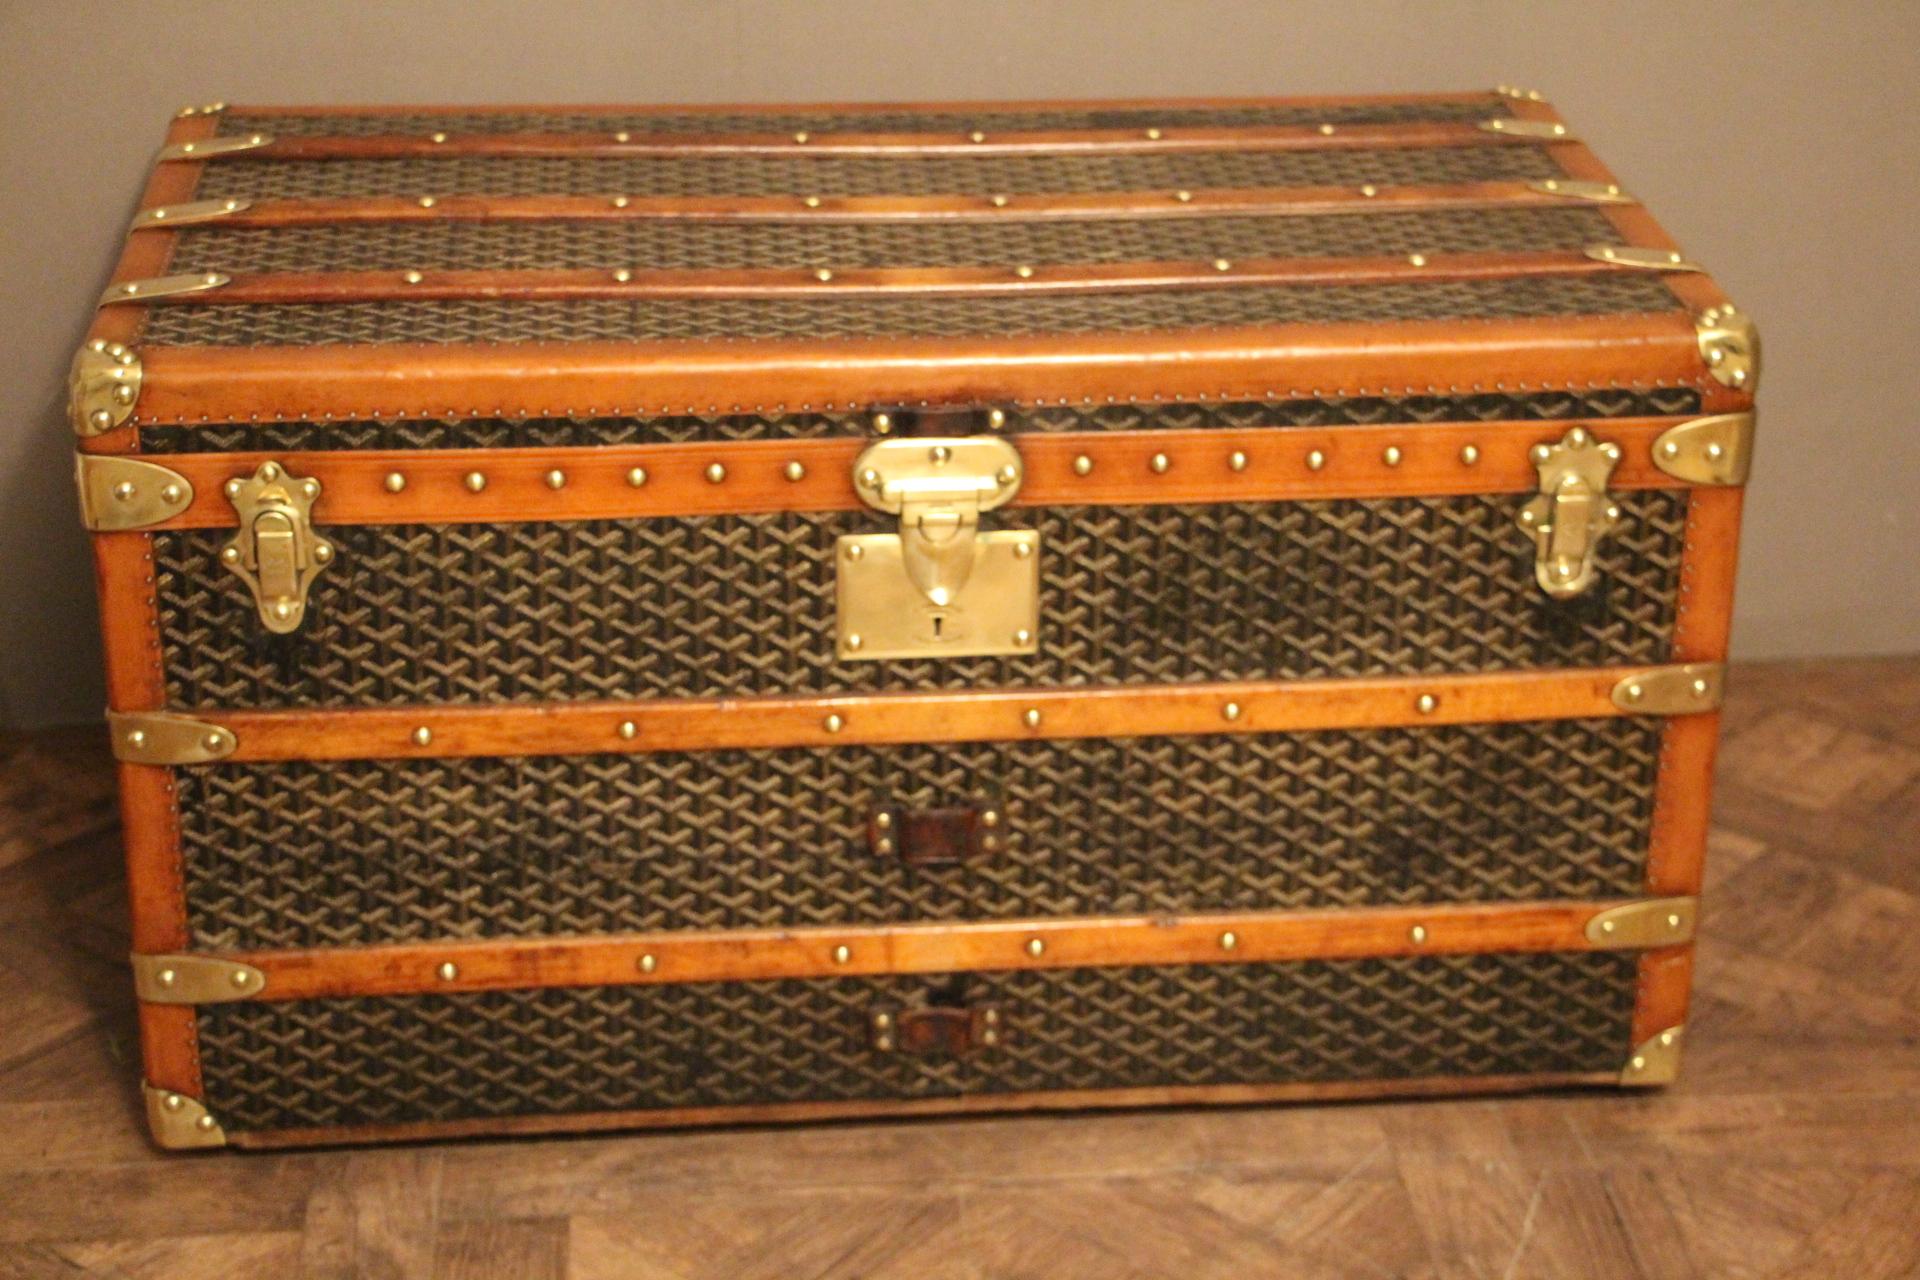 This Aine Goyard courrier trunk has got very nice proportions as well as a beautiful, warm patina.
It features its famous and sought after chevron canvas, its original solid brass stamped lock, solid brass stamped clasps and solid brass stamped